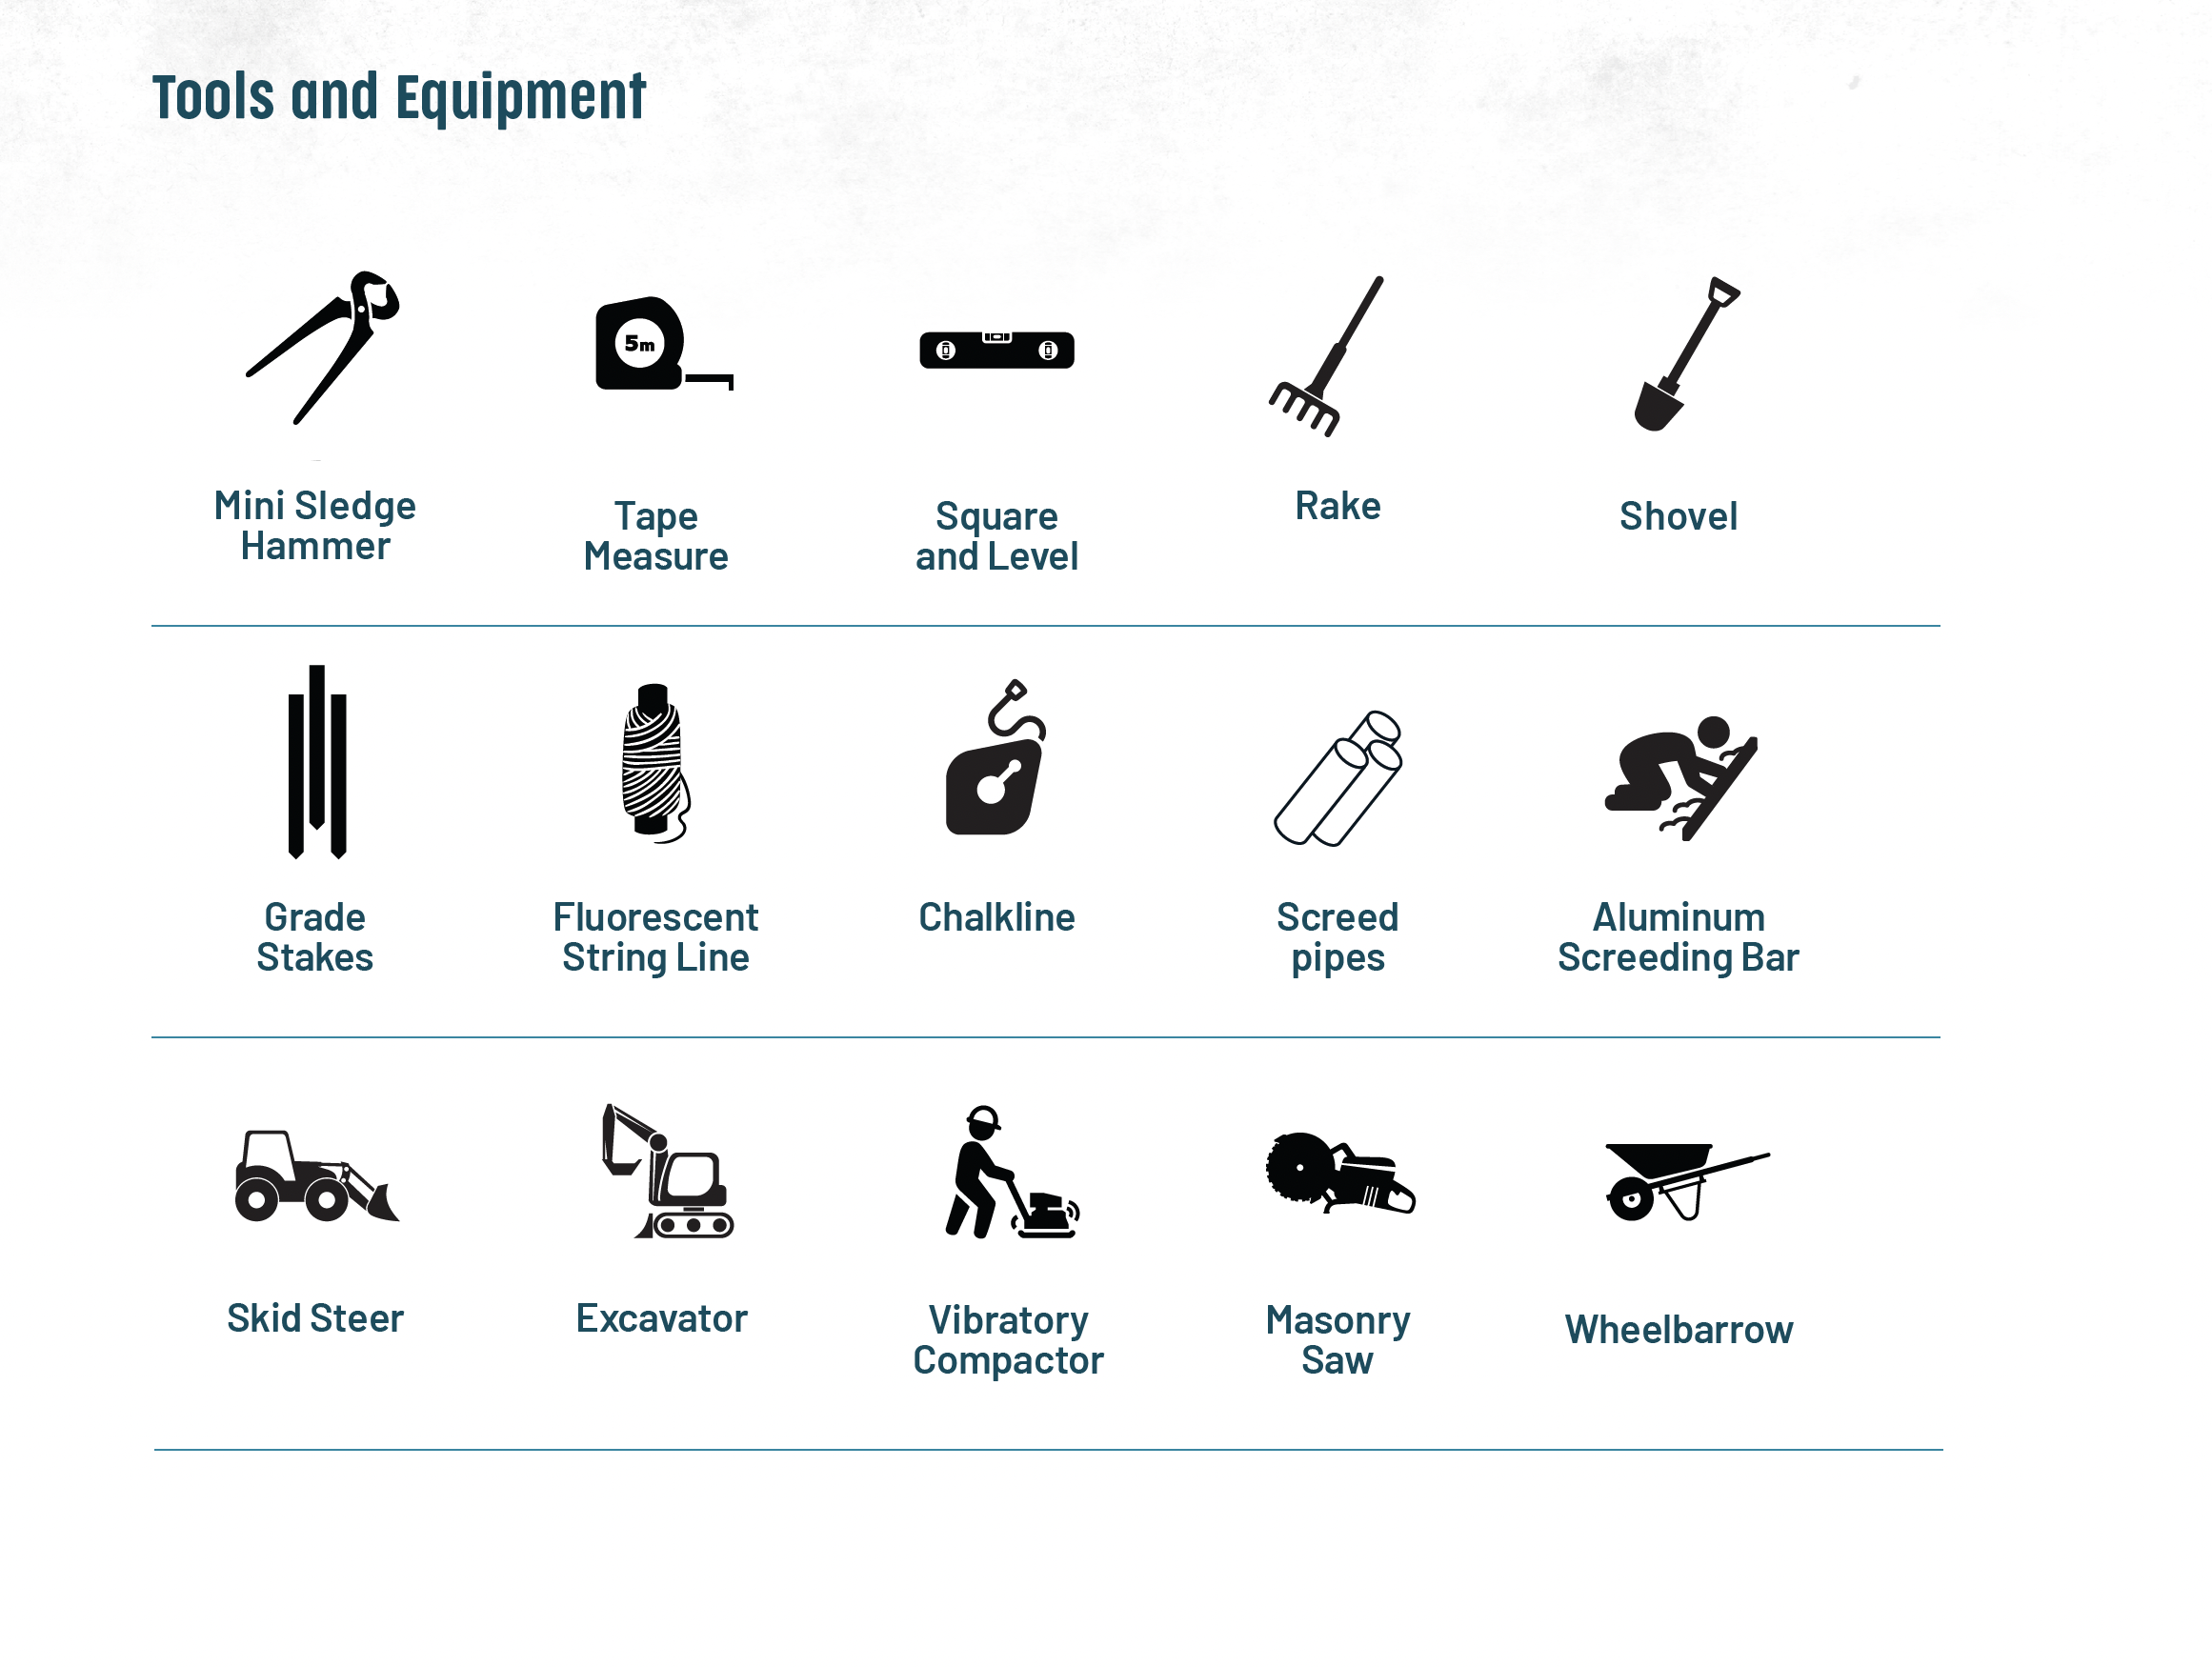 Tools and equipment